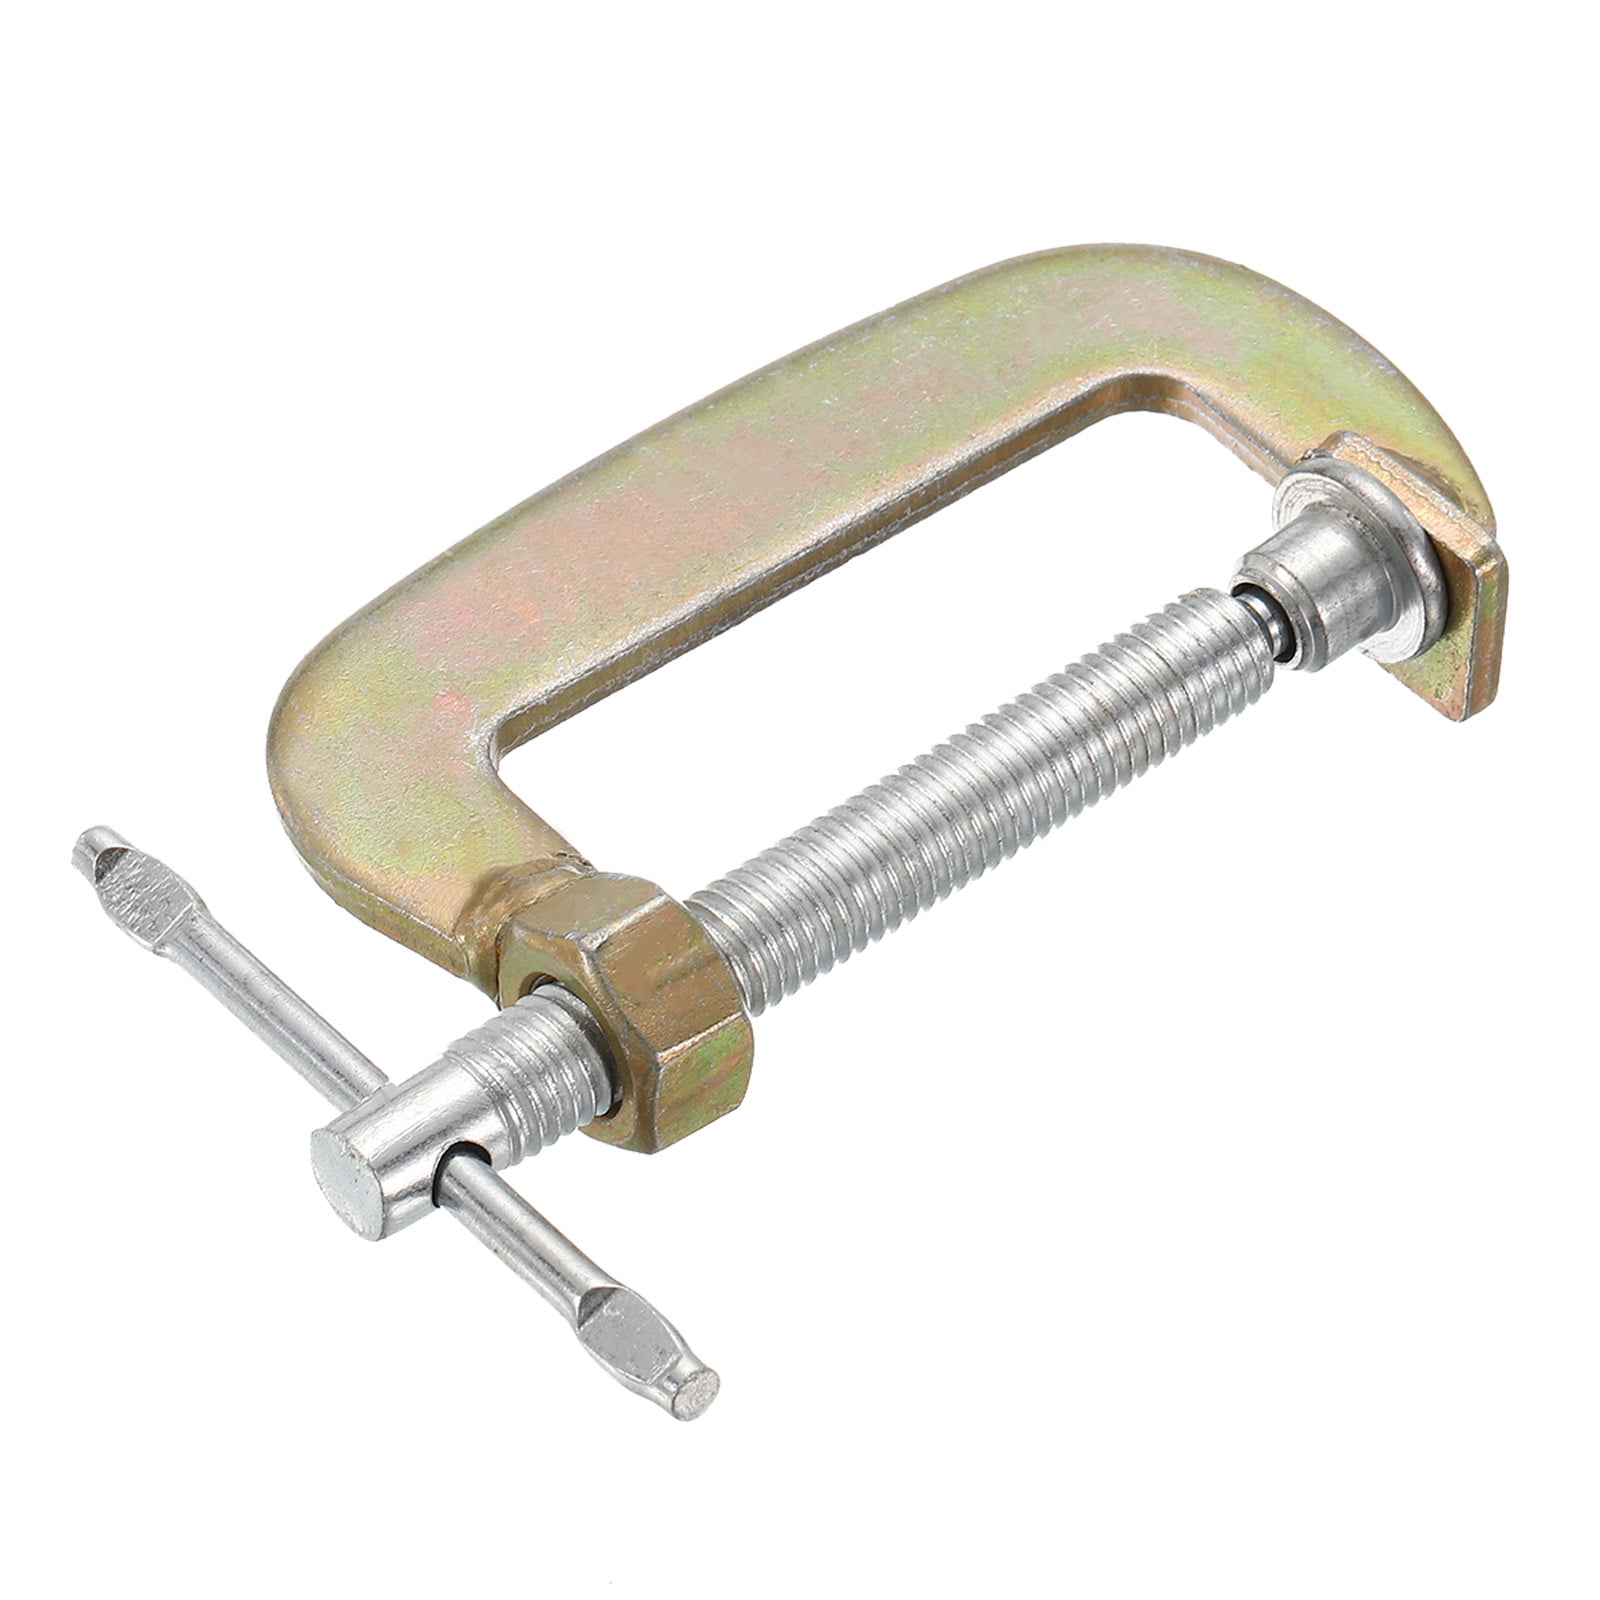 OhLectric OL-72839 Beam C Clamp - Malleable Iron, Guinea